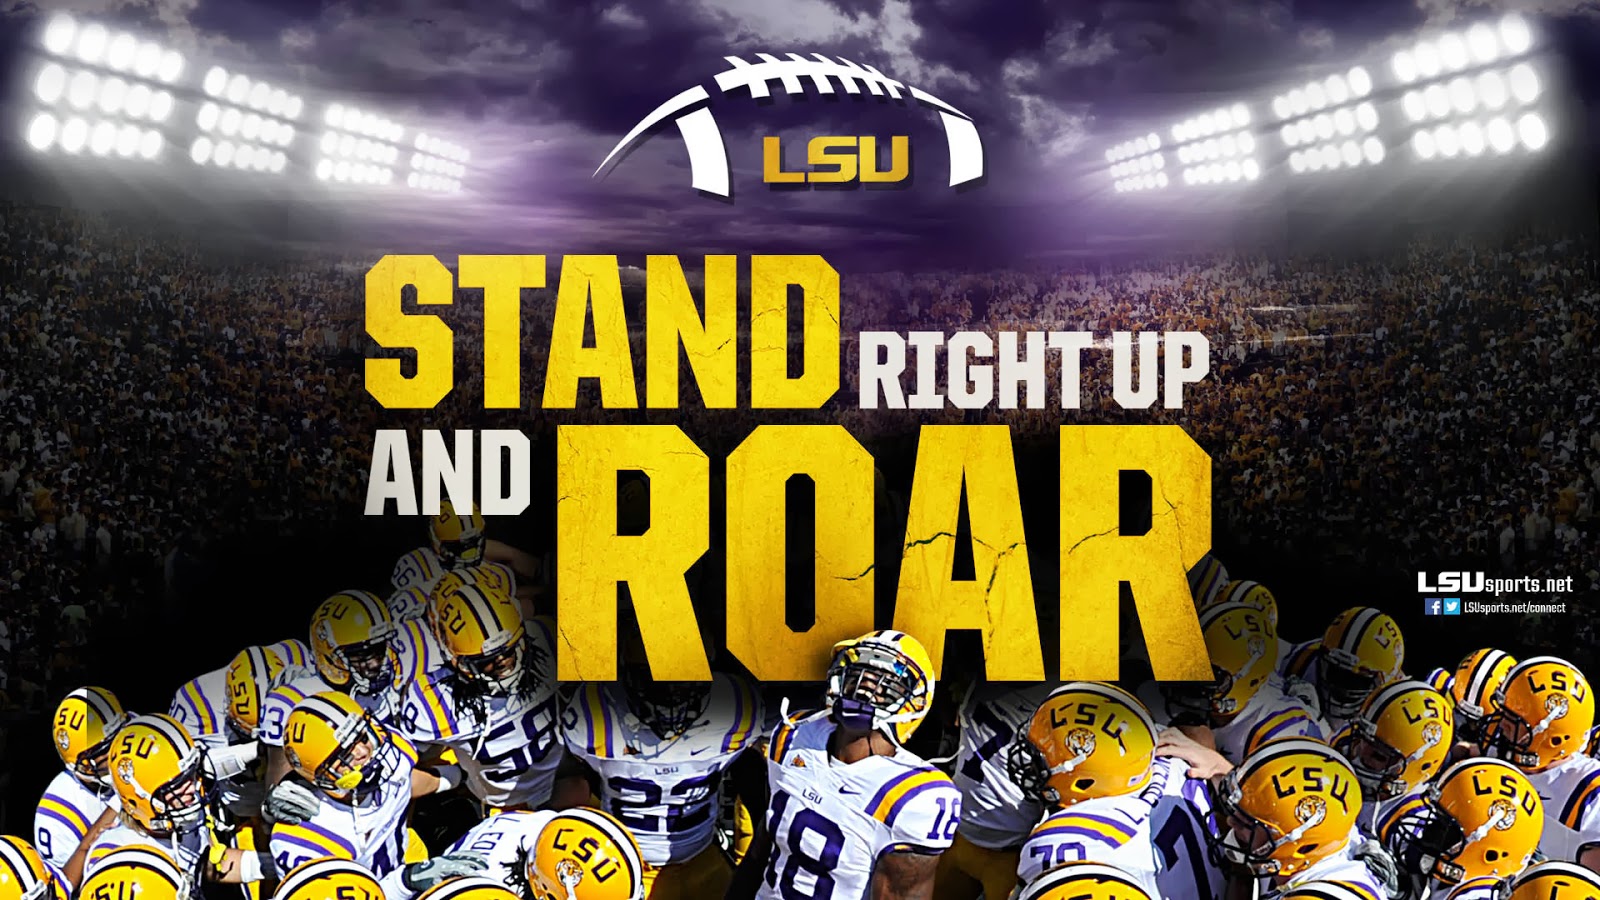 Wallpaper And Make This Lsu Football For Your Desktop